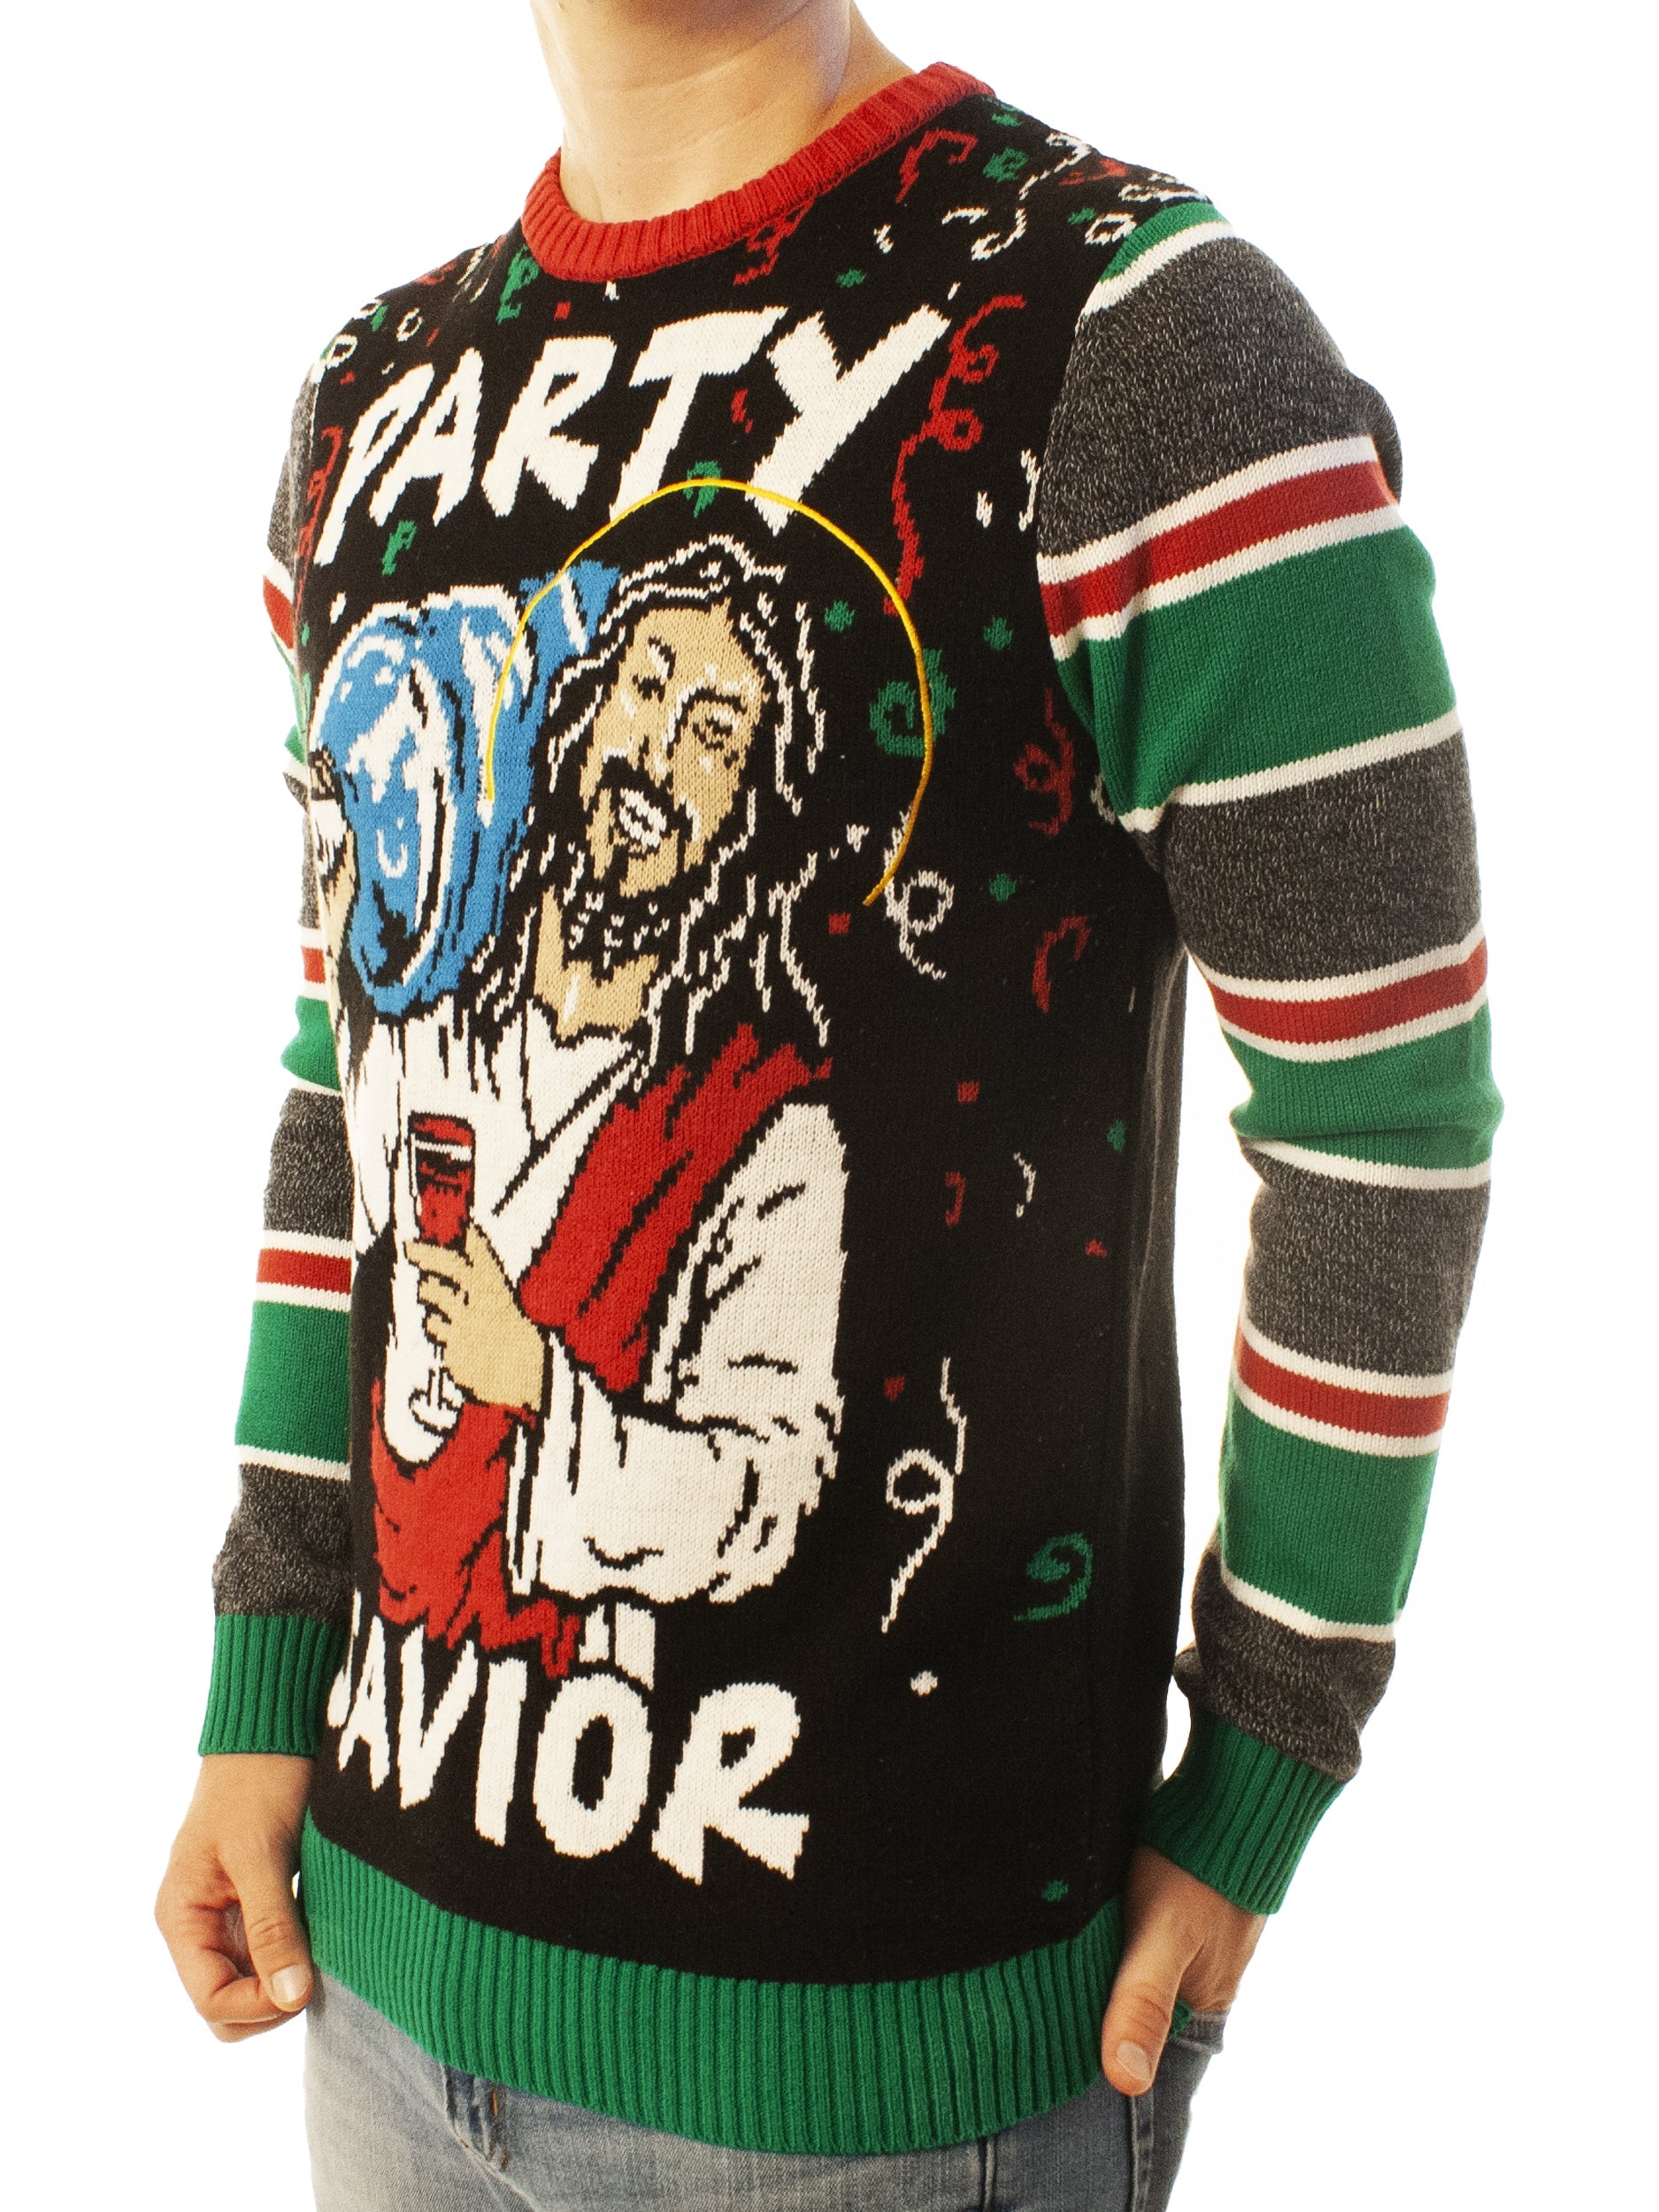 Jesus Party Savior Funny Ugly Christmas Sweater - Xmas Gifts For Him Or Her - Jesus Christ Sweater - Christian Shirts Gifts Idea